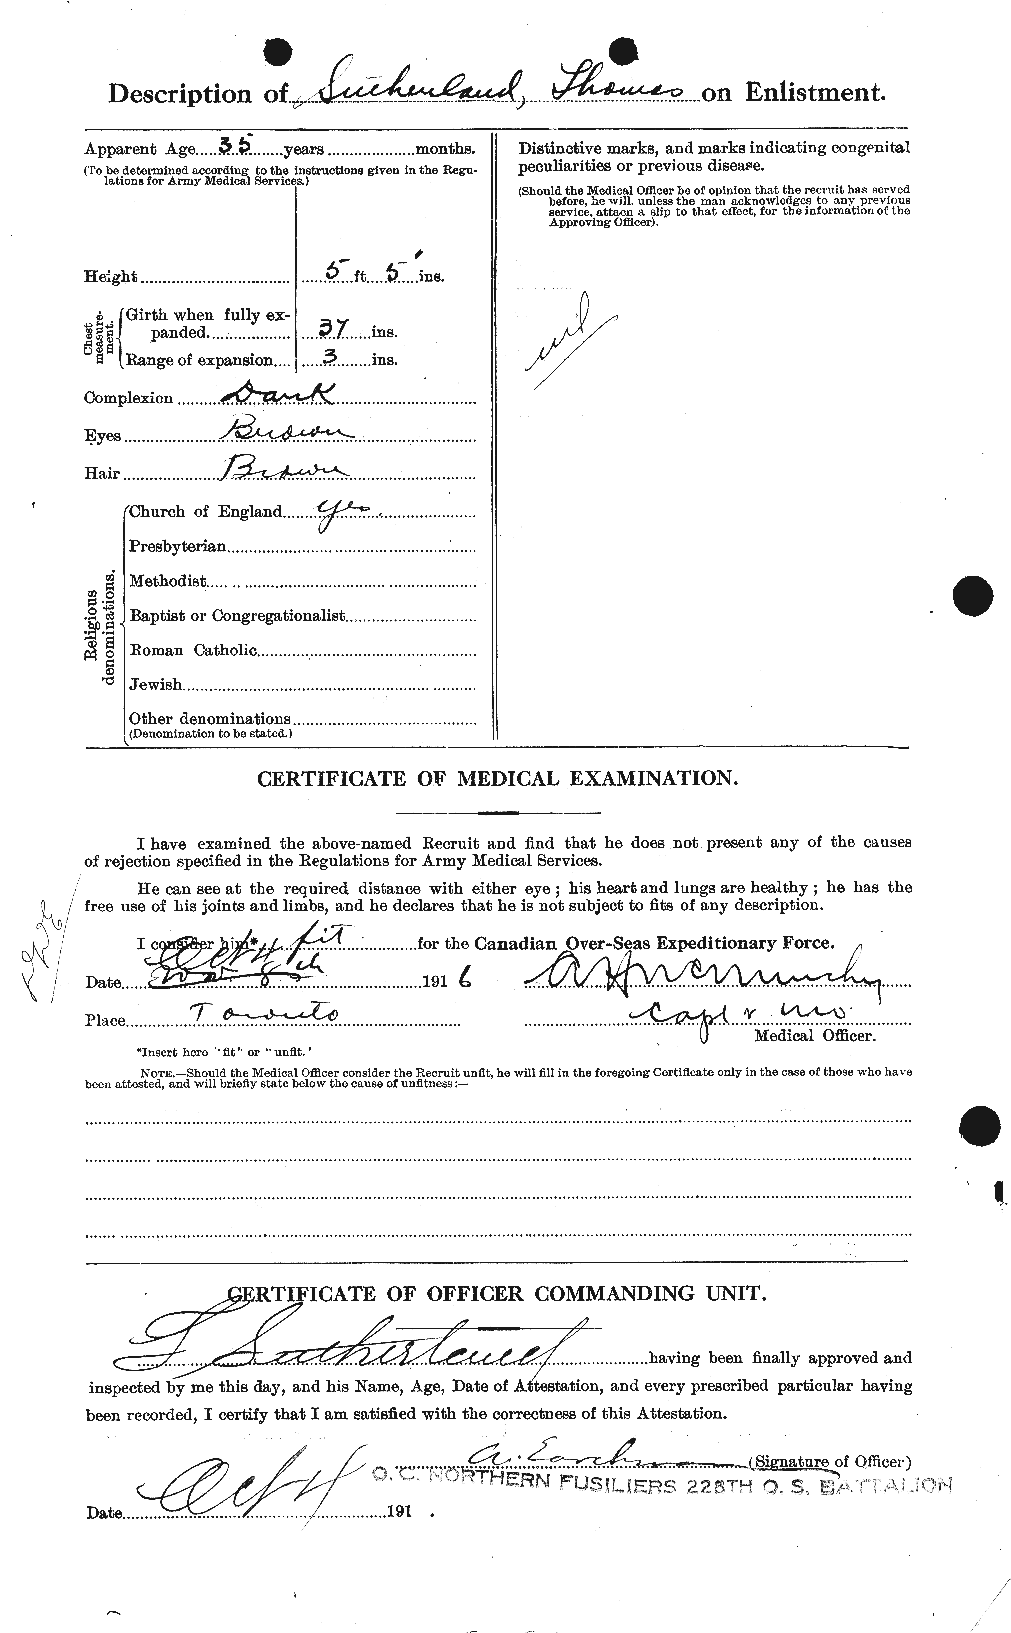 Personnel Records of the First World War - CEF 126554b